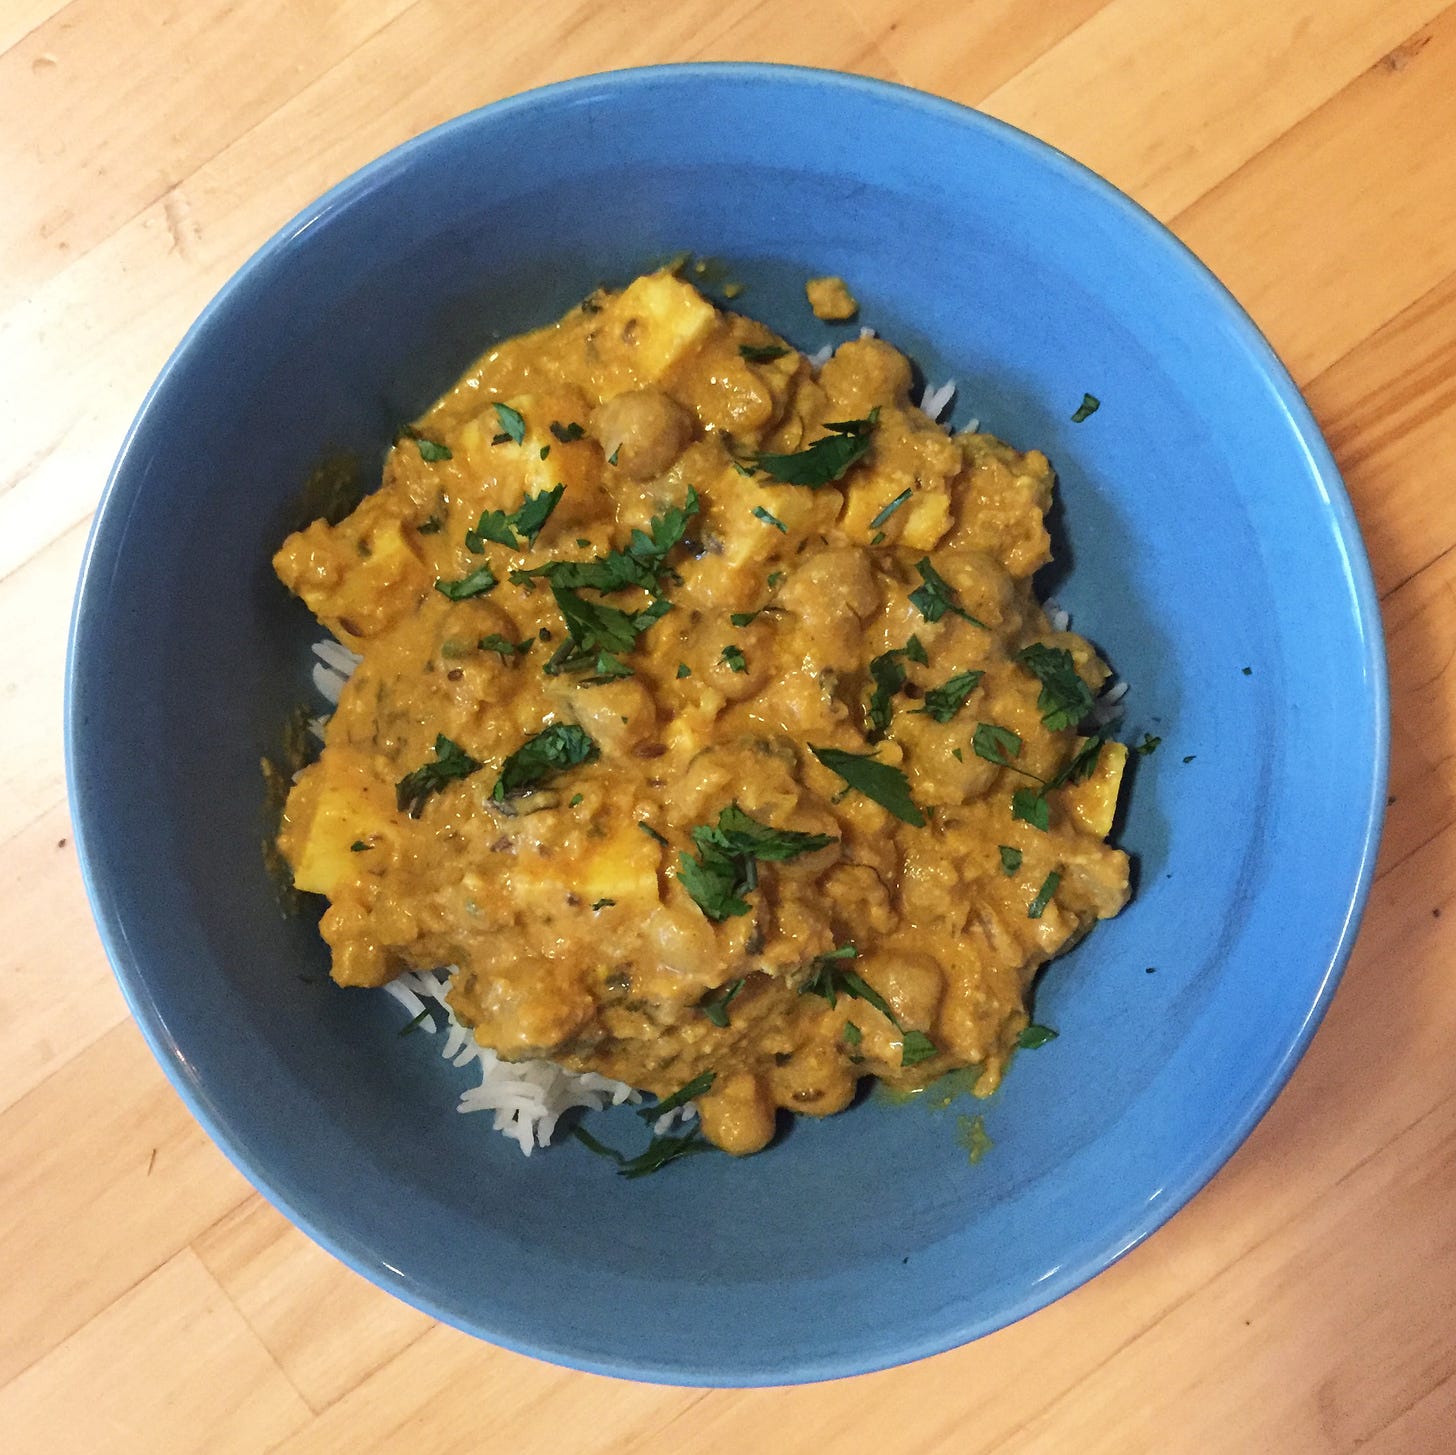 A blue bowl full of basmati rice and a thick yellow curry with chickpeas and paneer. Cilantro is sprinkled over the top.